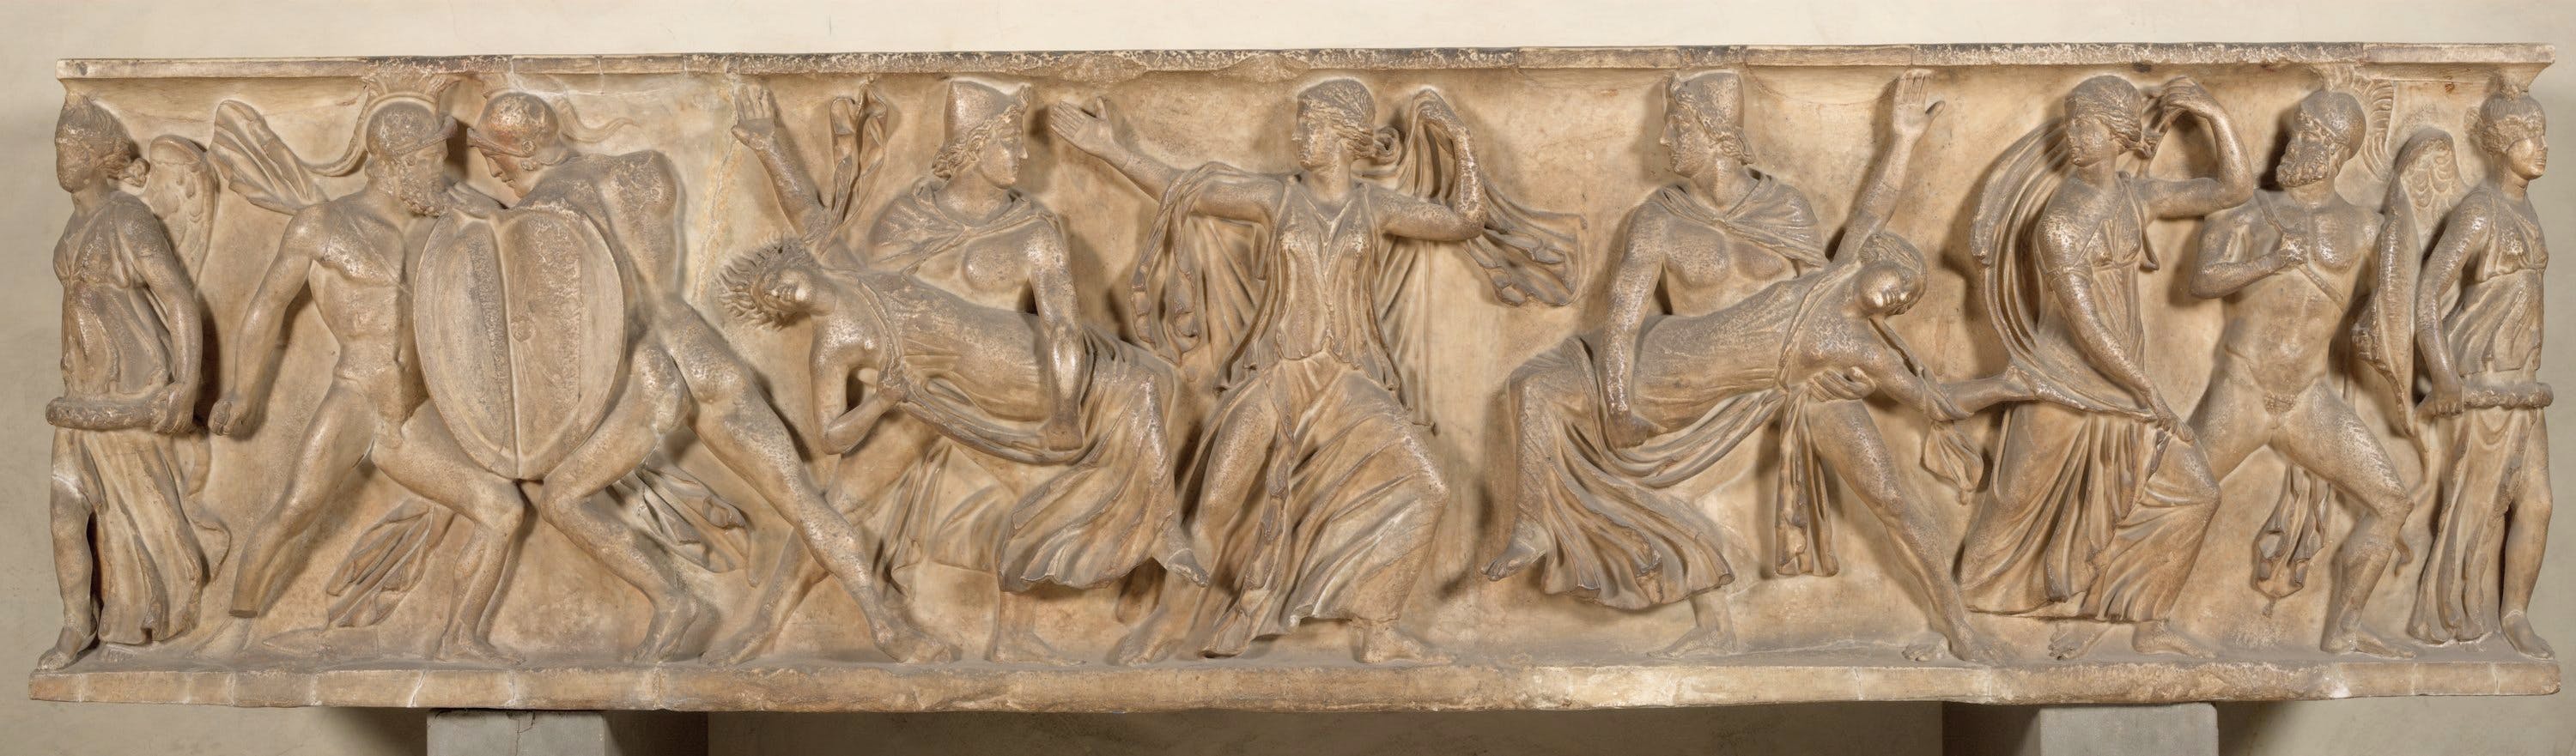 Sarcophagus, Marriage of Dioscuri and Leucippides